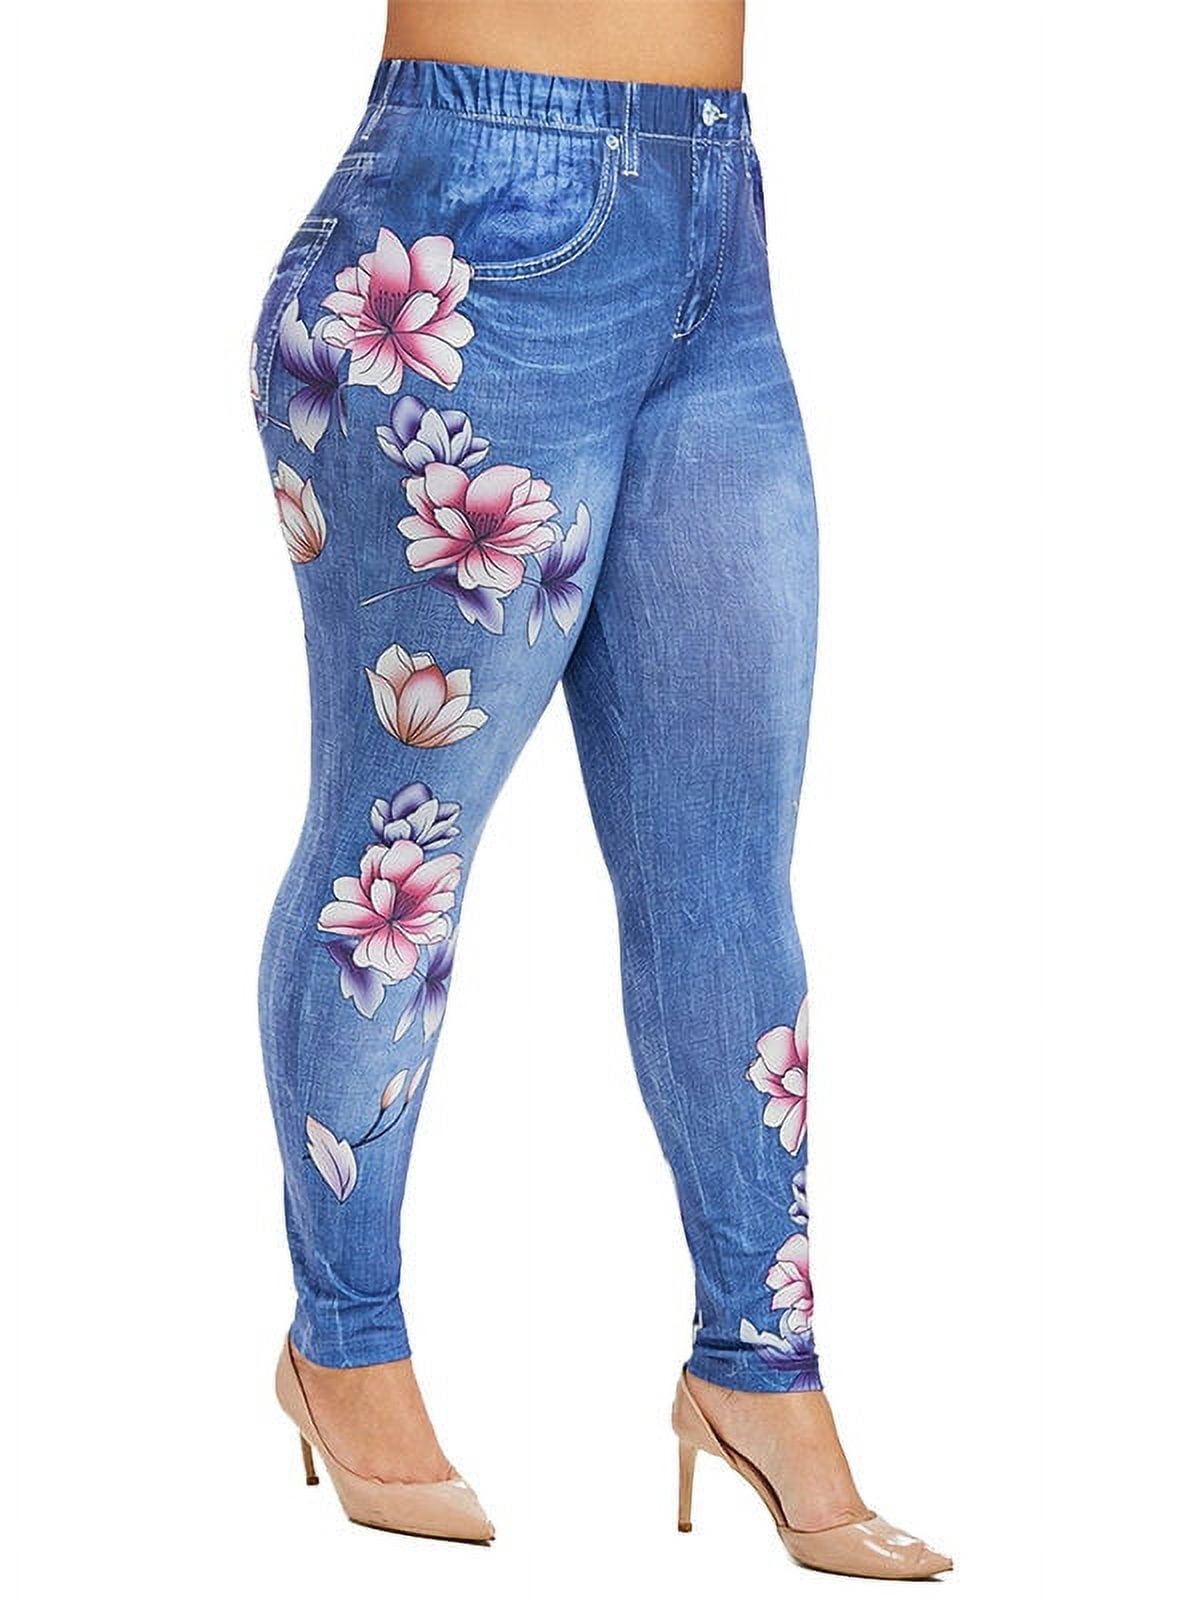 High waisted multicolored flower thermal jeggings